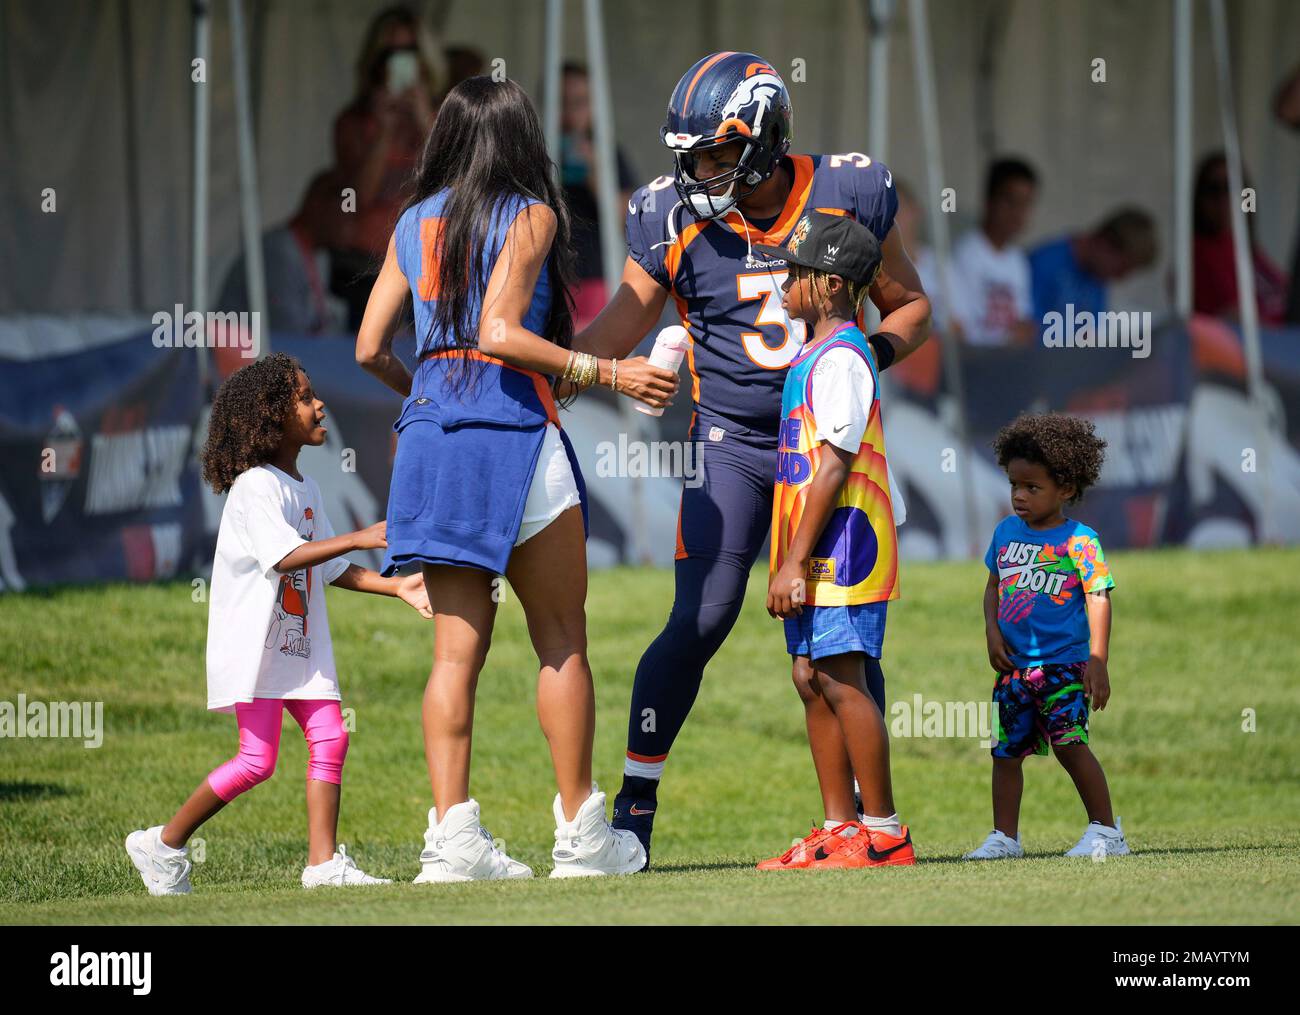 russell wilson broncos jersey youth